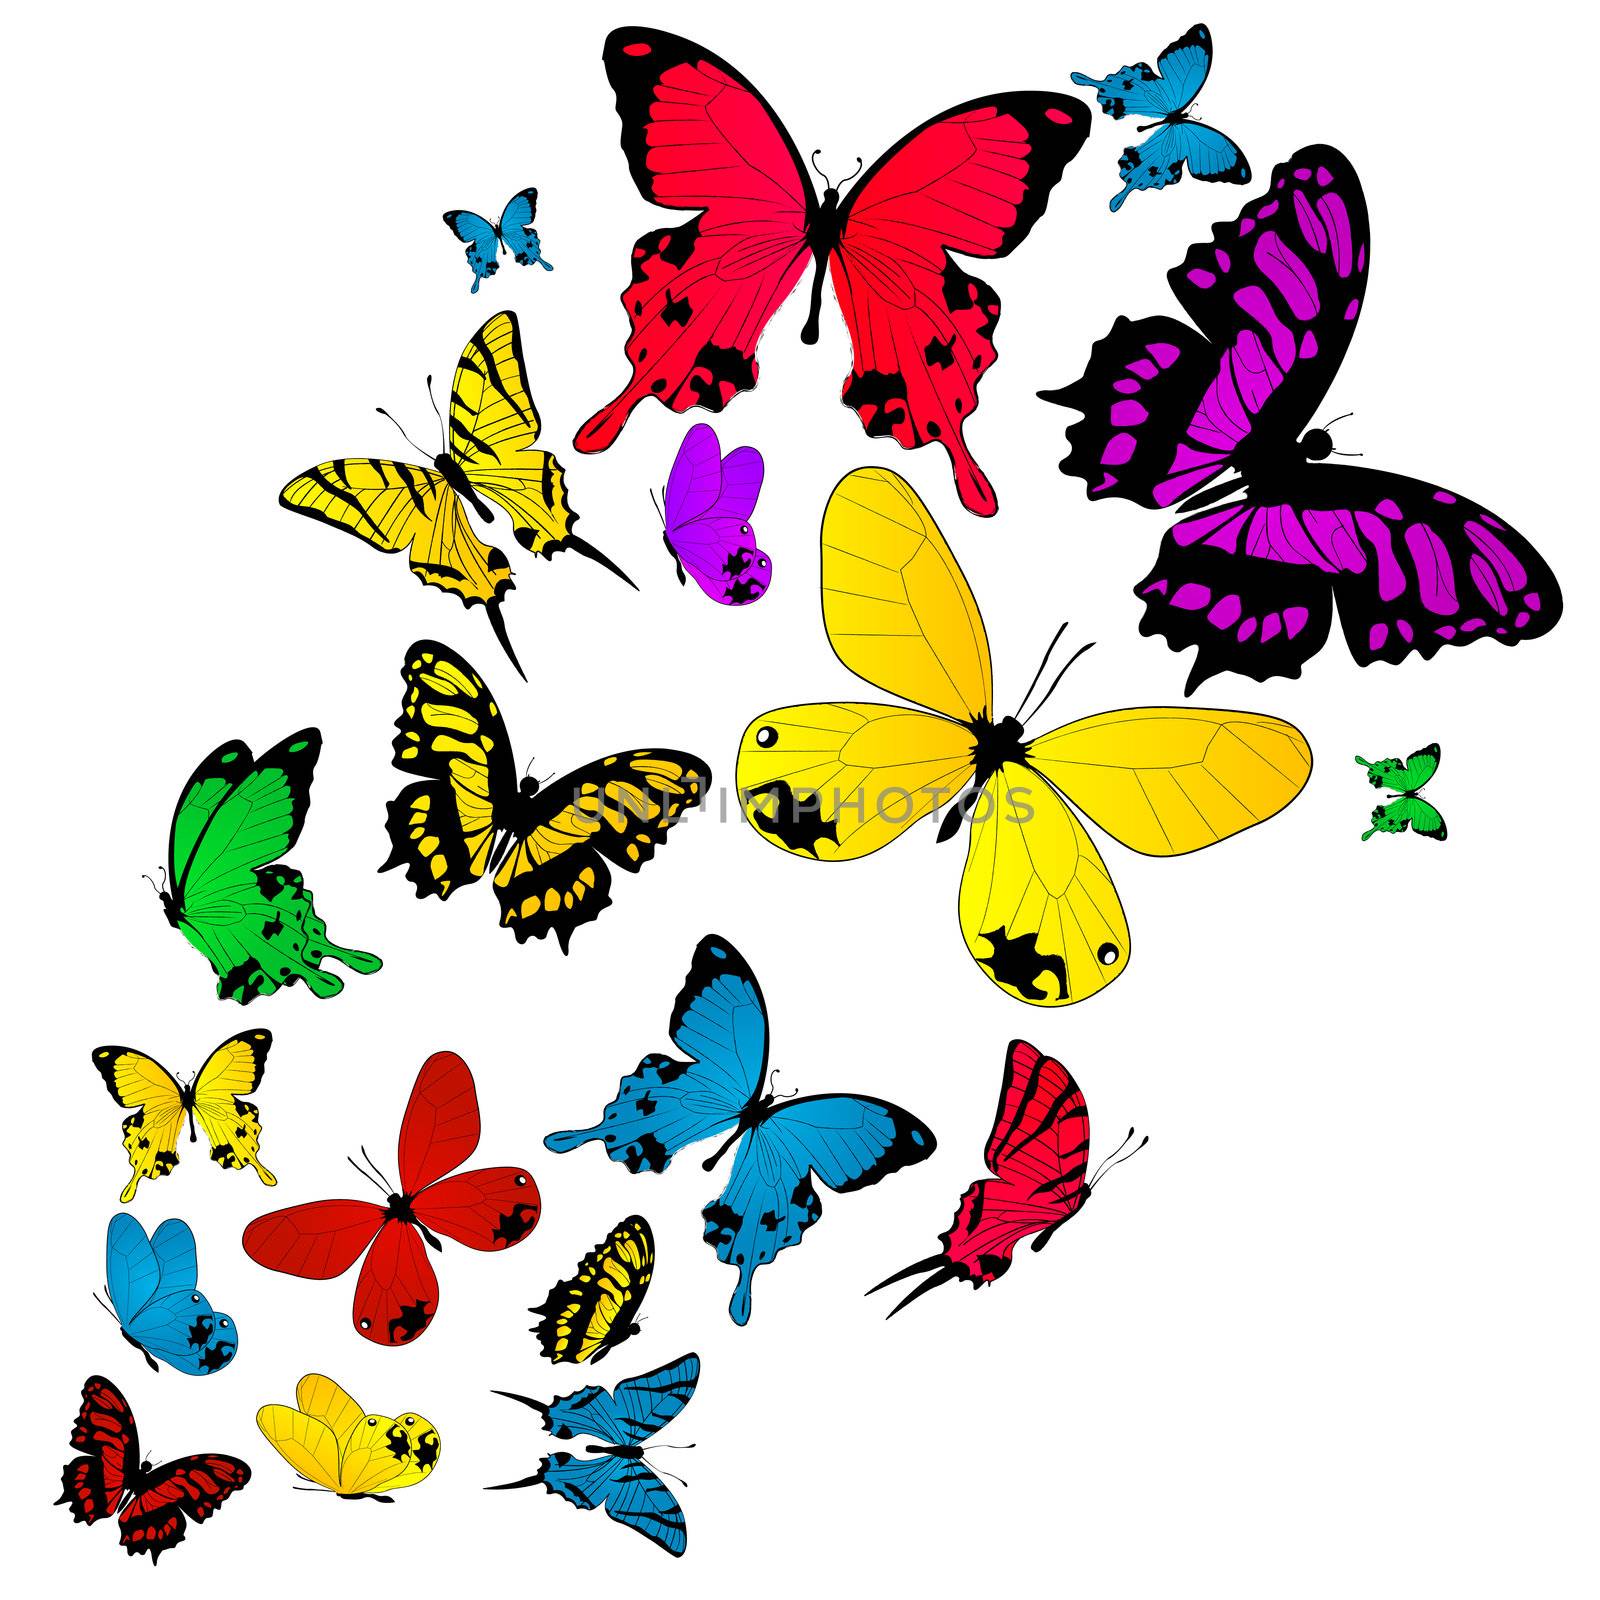 Colored butterflies background by Lirch